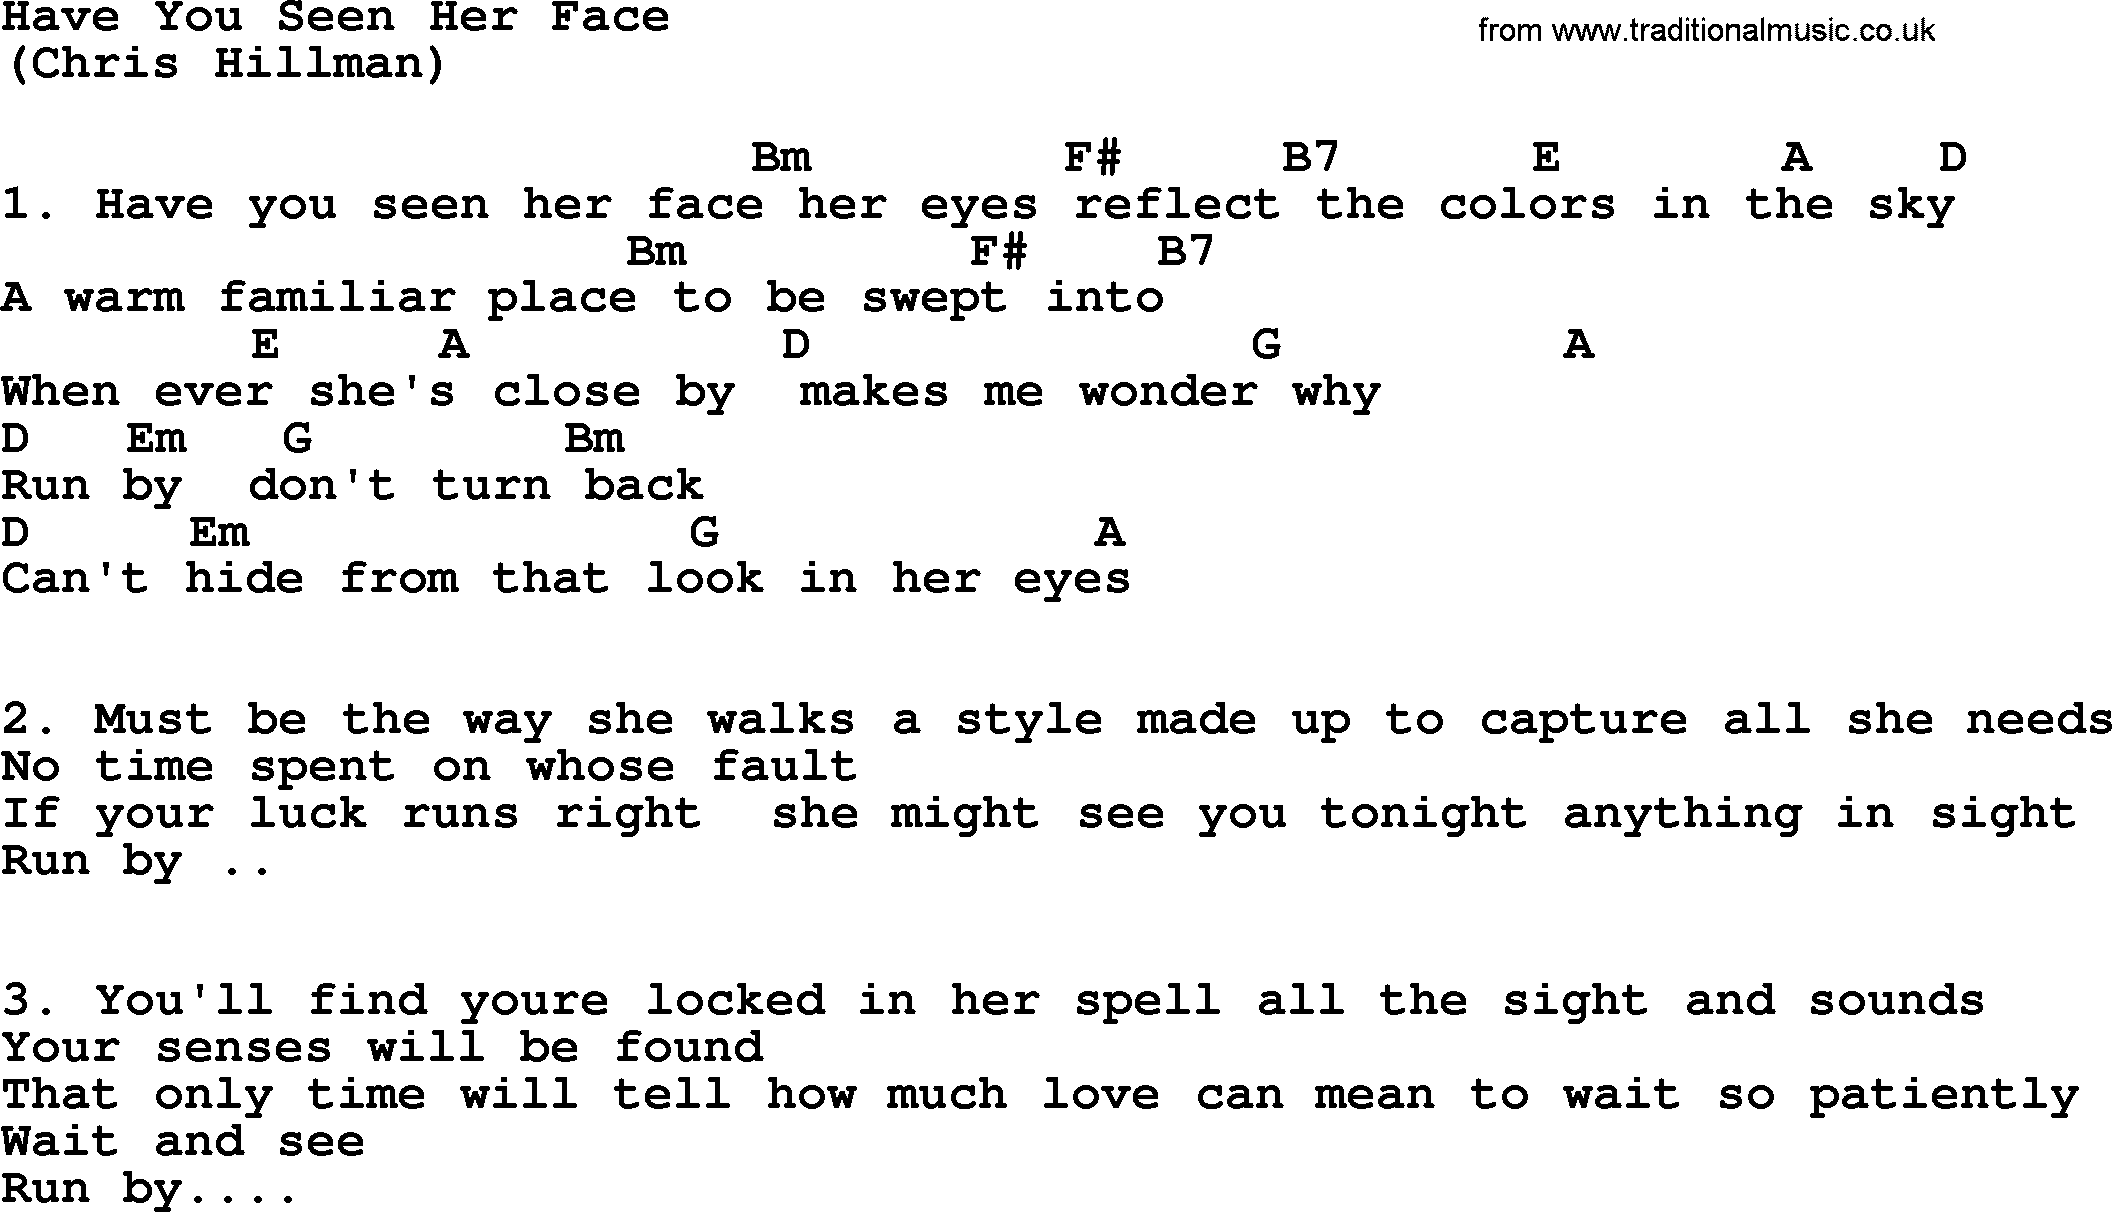 The Byrds song Have You Seen Her Face, lyrics and chords